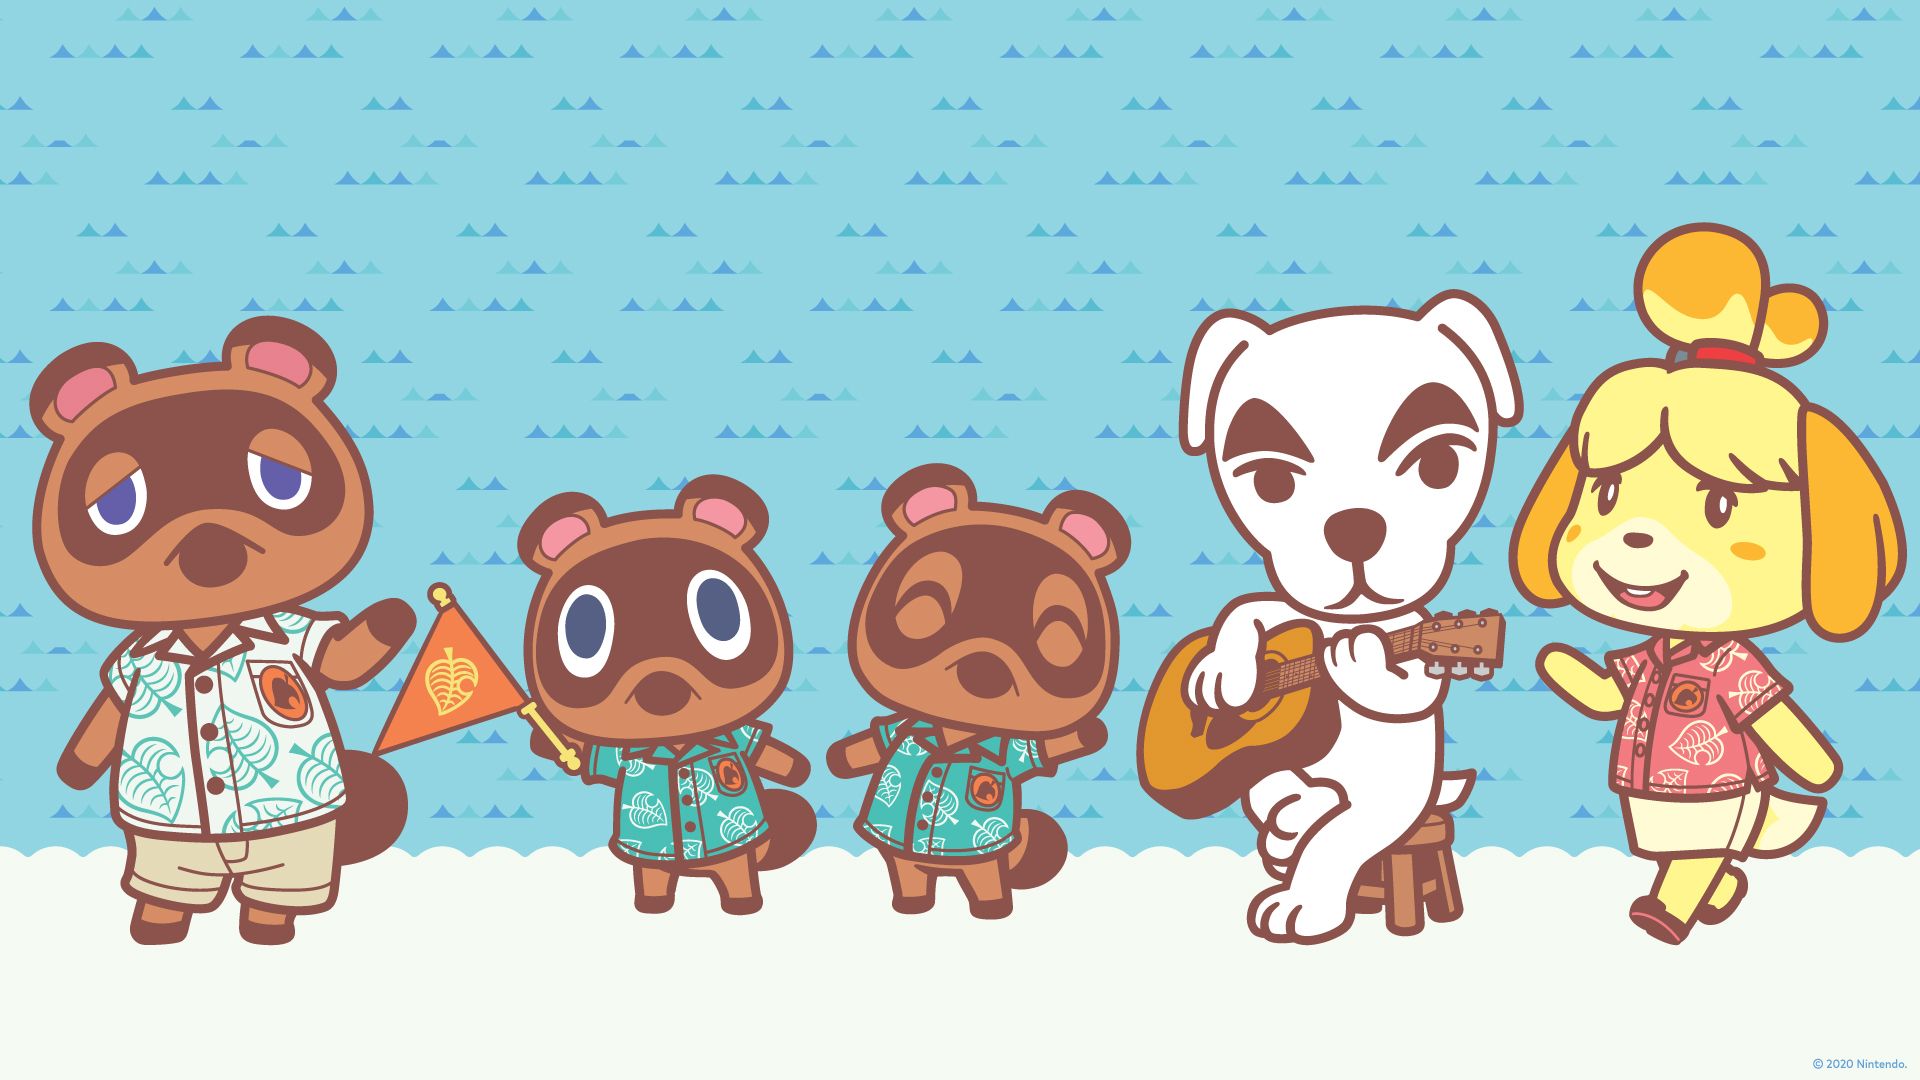 Walmart's offering up some free Animal Crossing: New Horizons